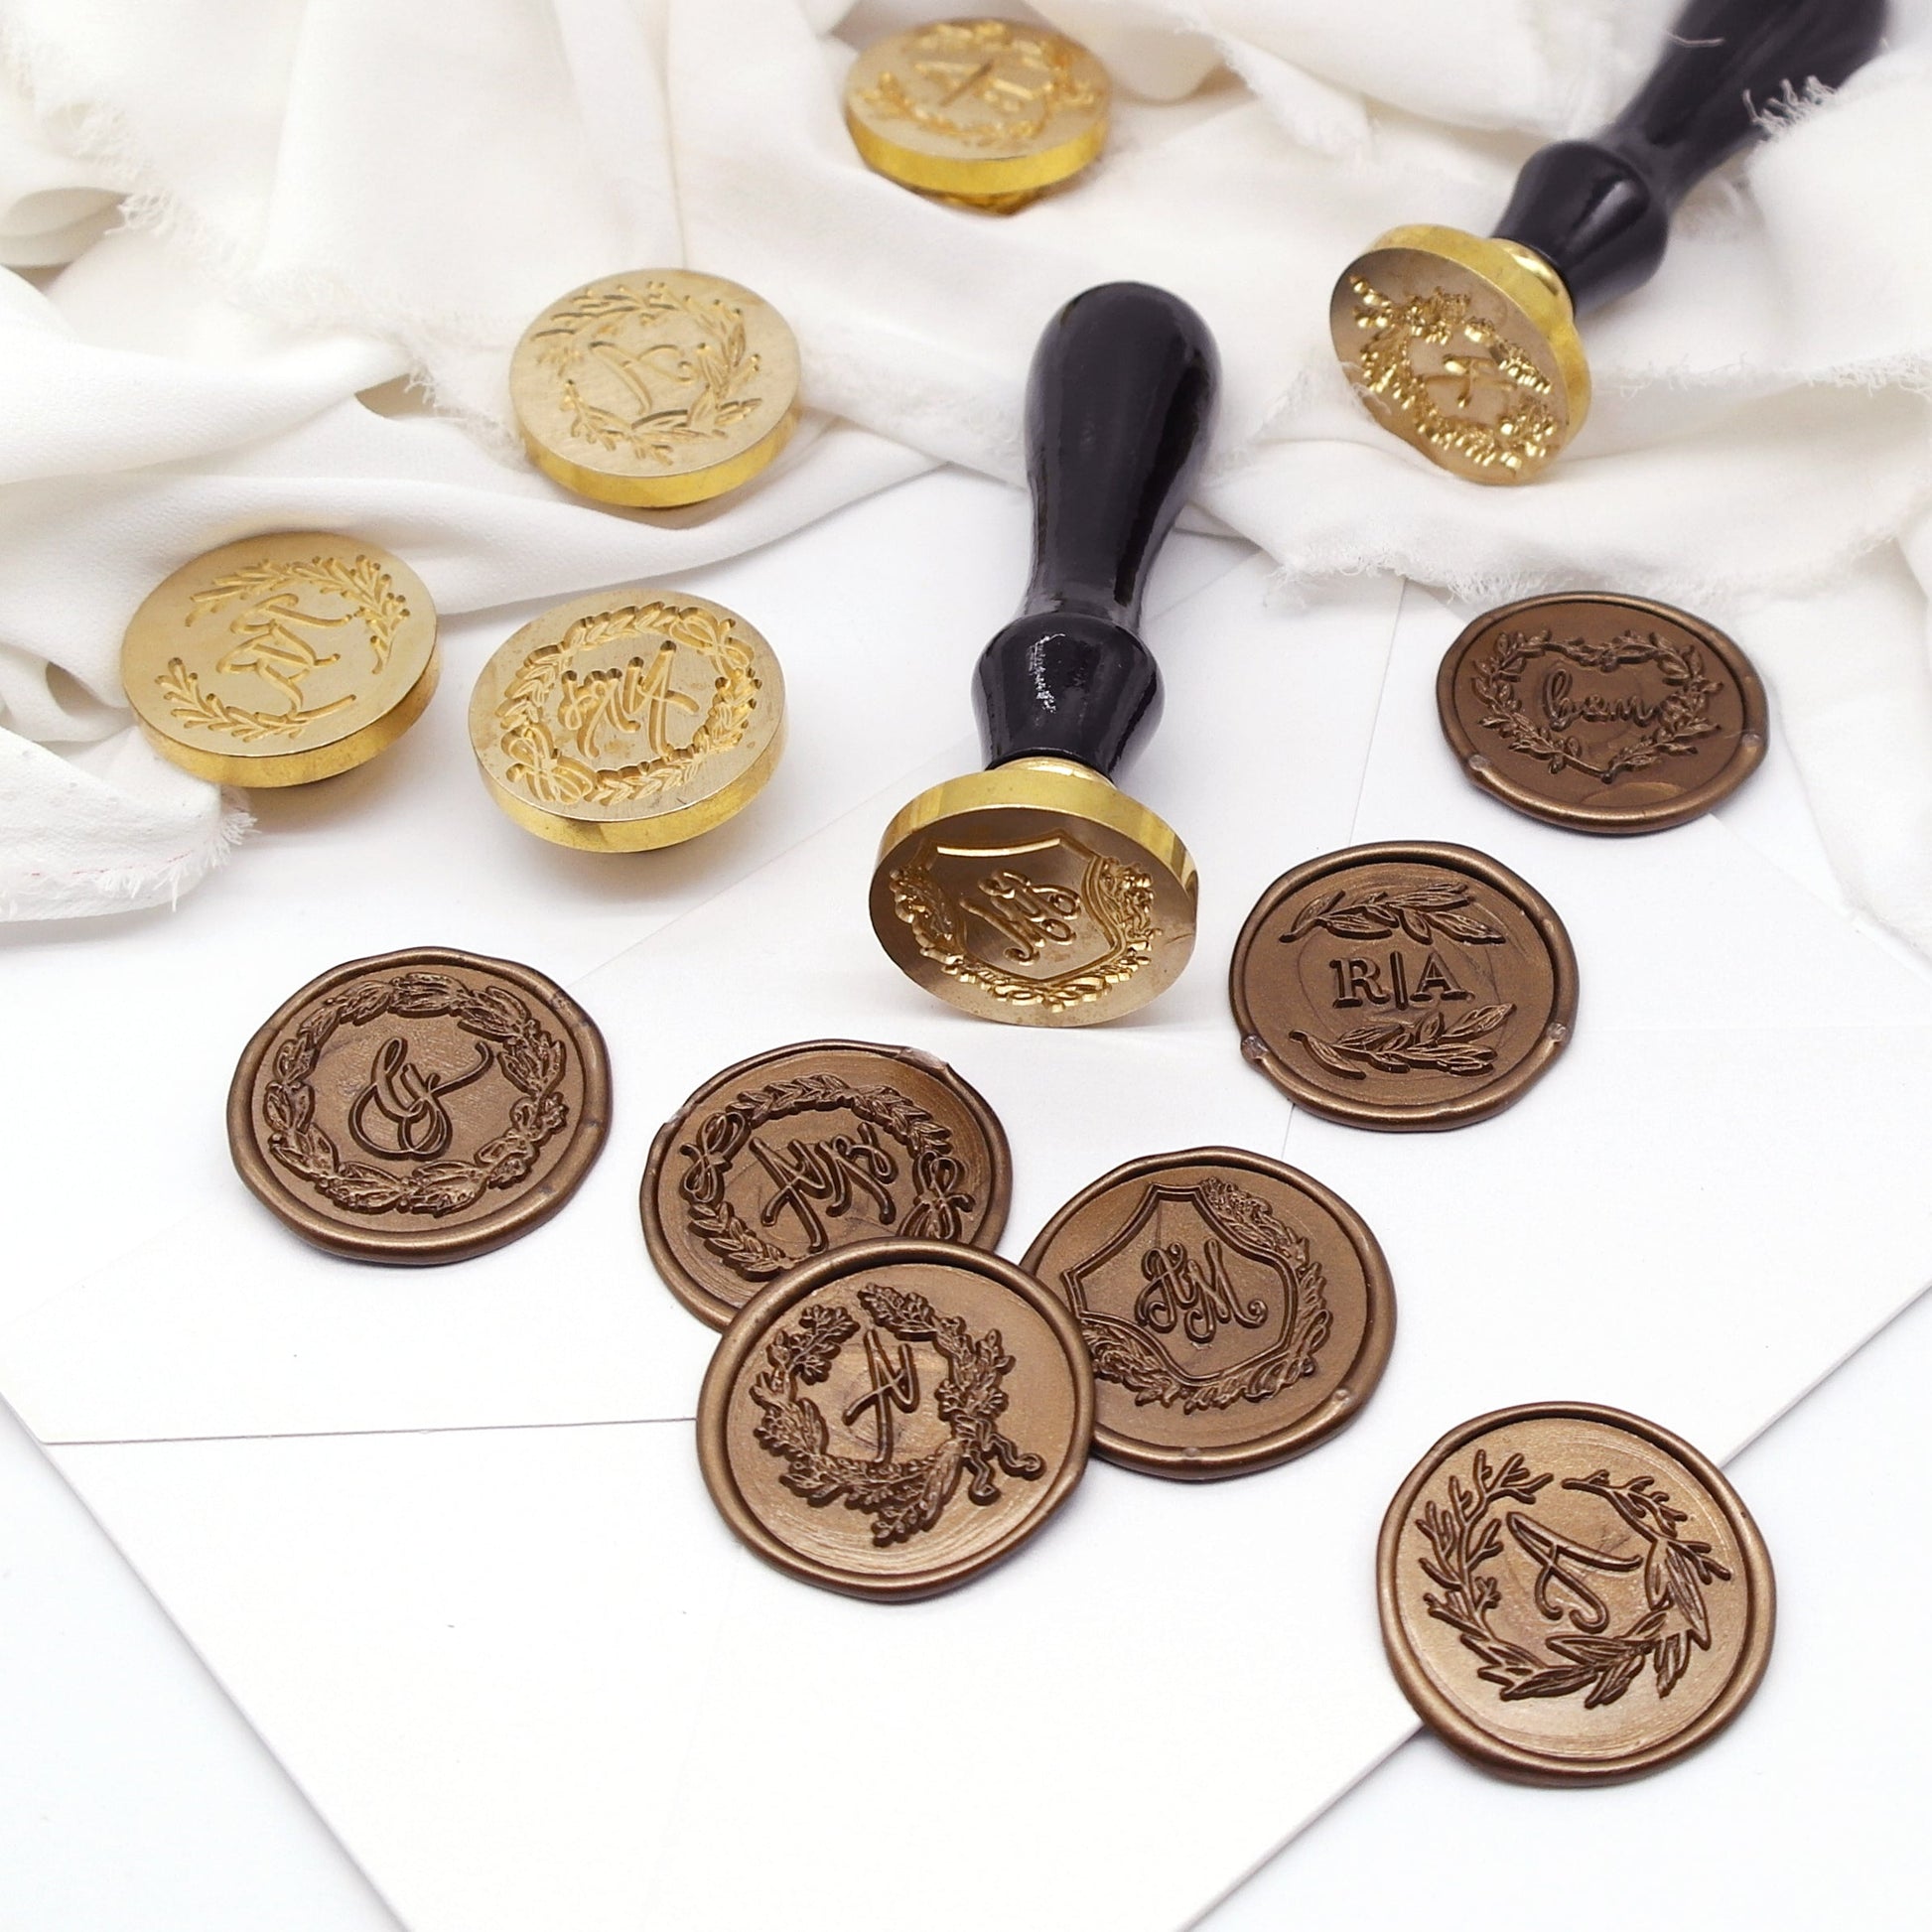 Custom Made Wax Seal Stamp - Personalized Custom Initials, Monograms & Text Wax Seal Stamp - for Wedding / Personal Use